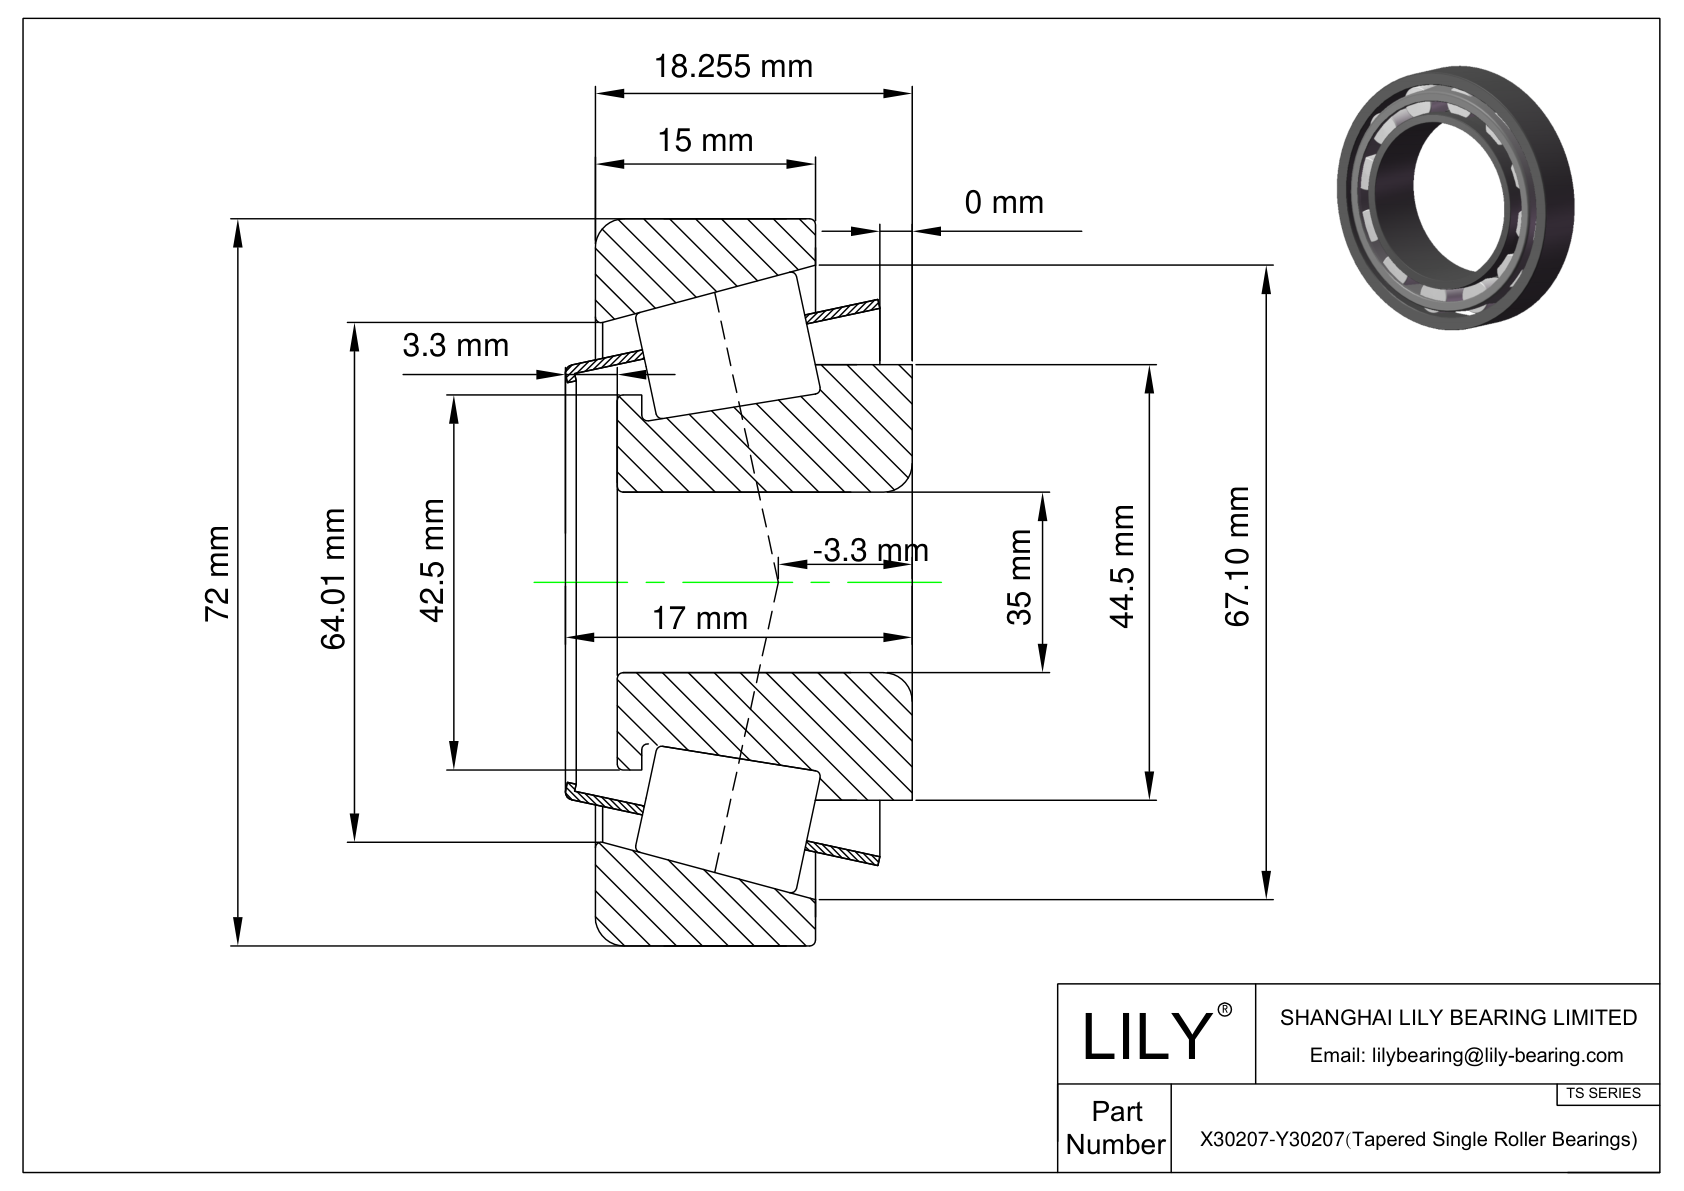 X30207-Y30207 TS (Tapered Single Roller Bearings) (Metric) cad drawing